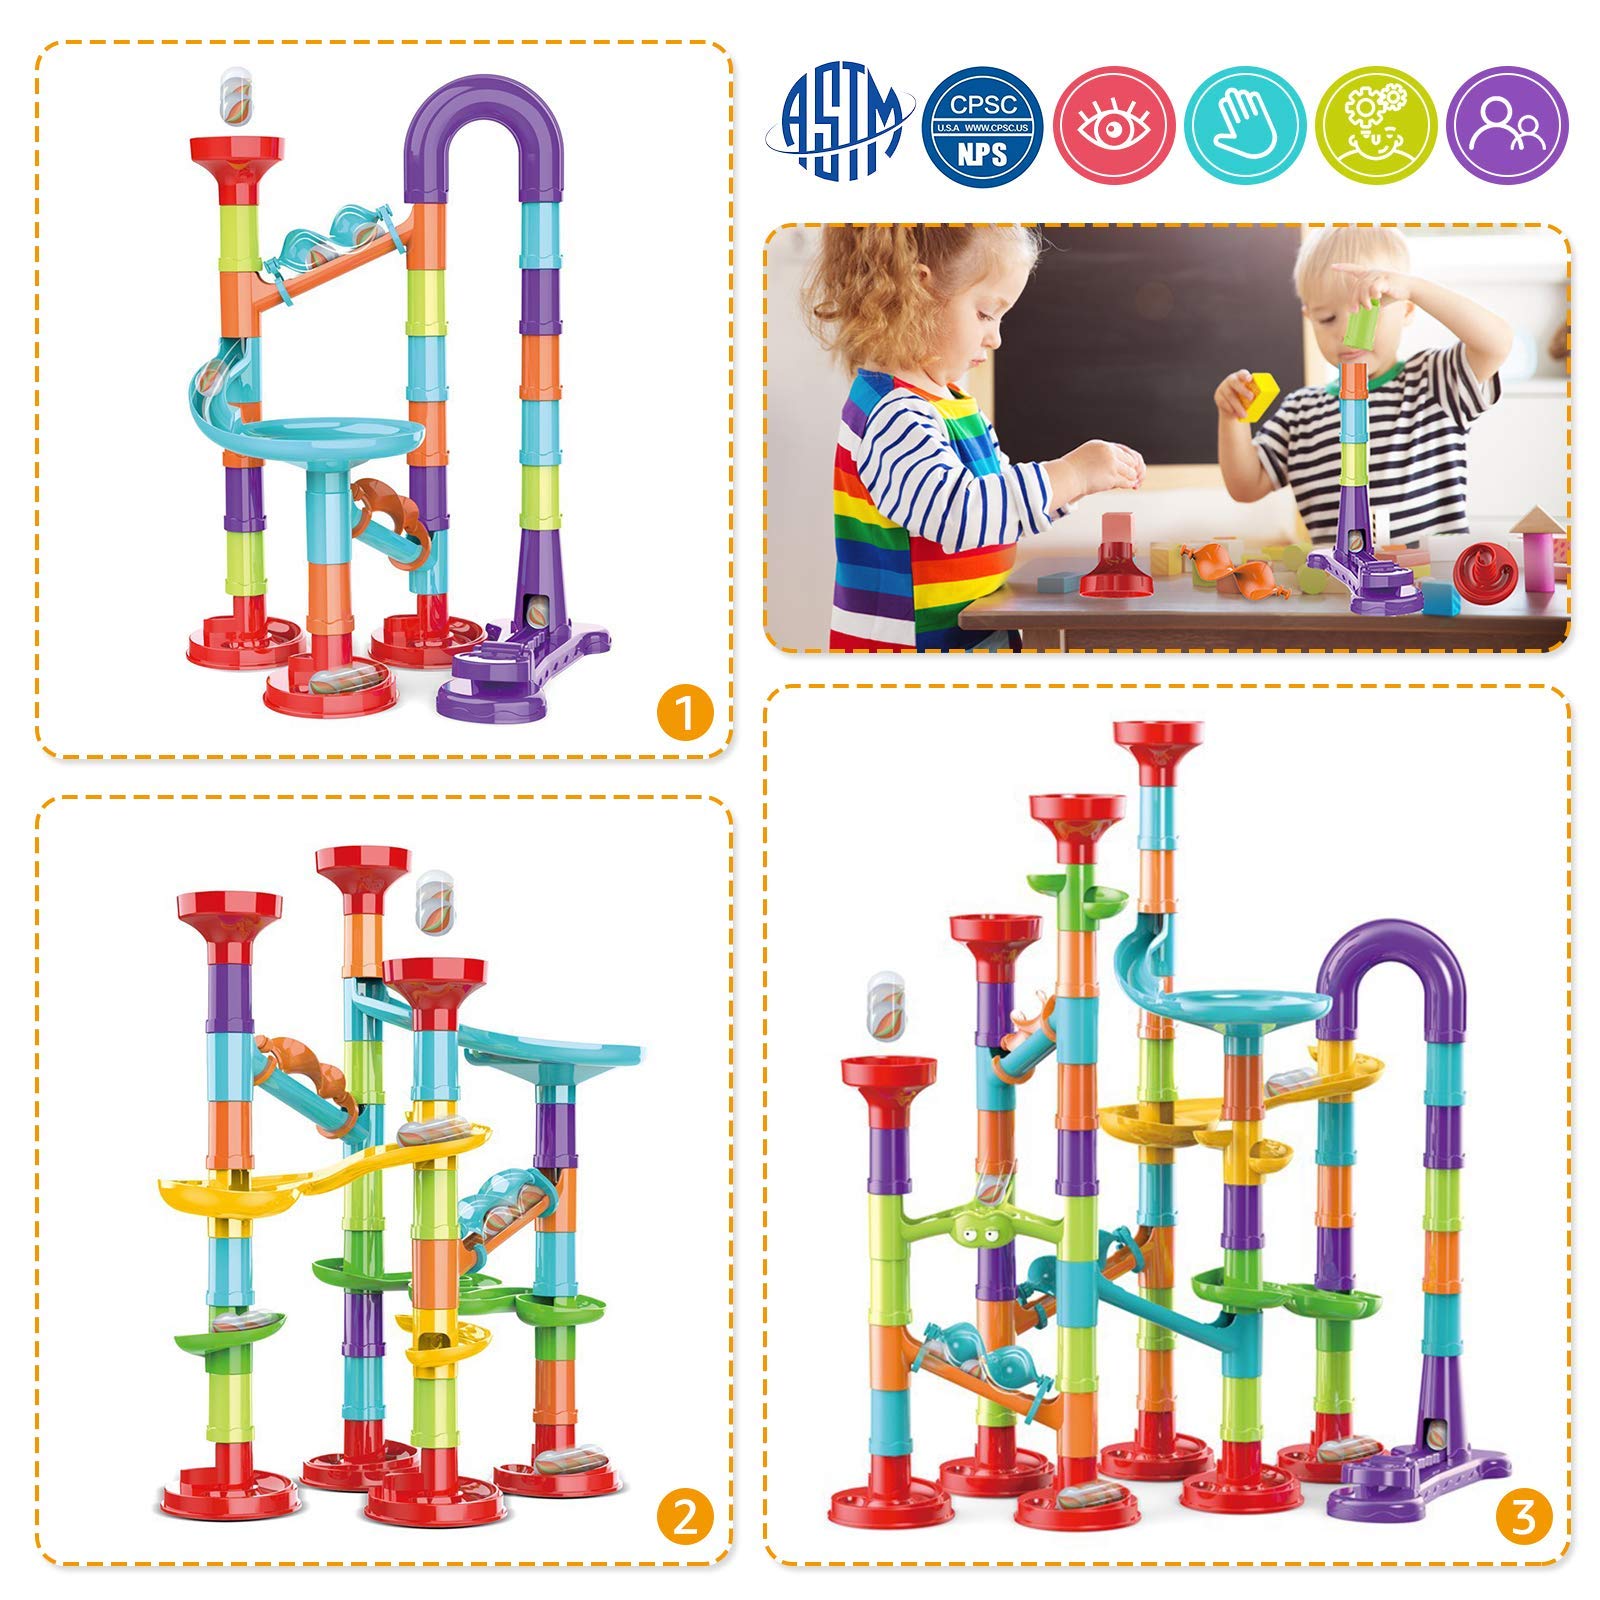 Marble Run Set Building Blocks Glass Marbles for Kids Ages 4-8 Girls Boys Toys STEM Maze Educational Race Game Birthday Gifts